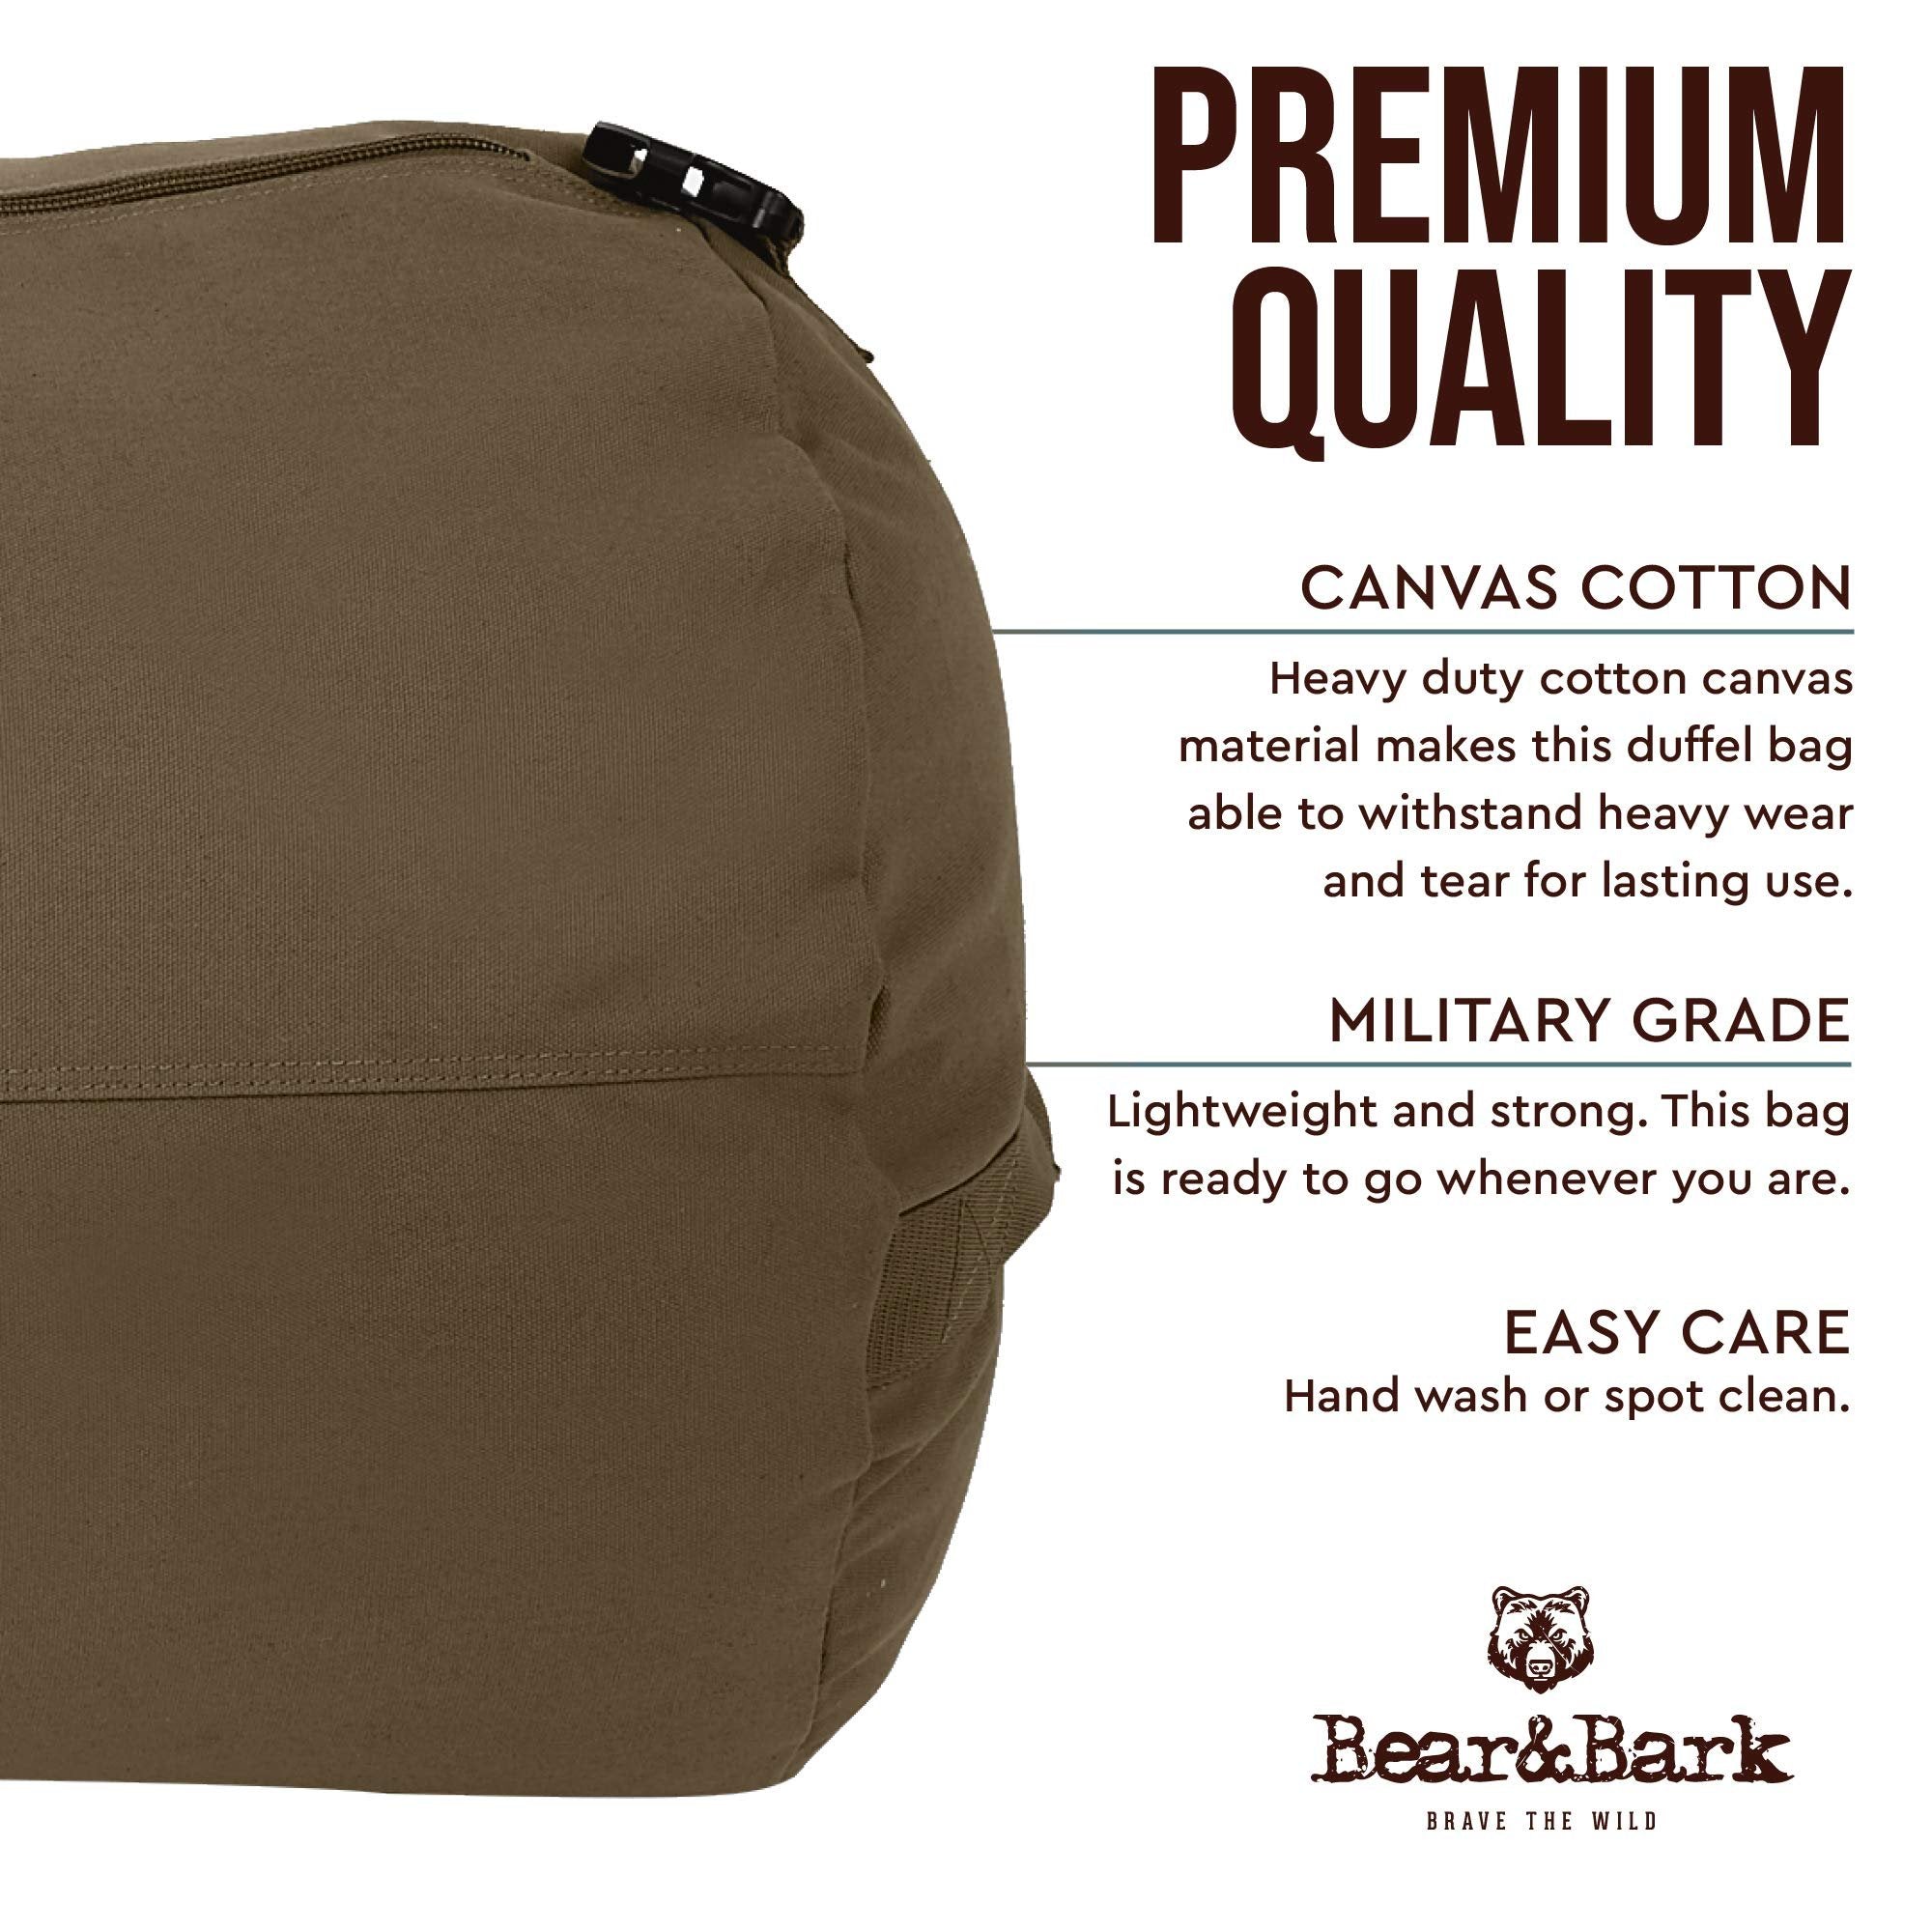 Very Large Duffle Bag - Military Green 38”x20” - 195.6L - Canvas Army Cargo Style Duffel Tote for Men and Women- College Student, Gym, Dorm, Backpacking, Sports,Travel Luggage and Storage Shoulder Bag